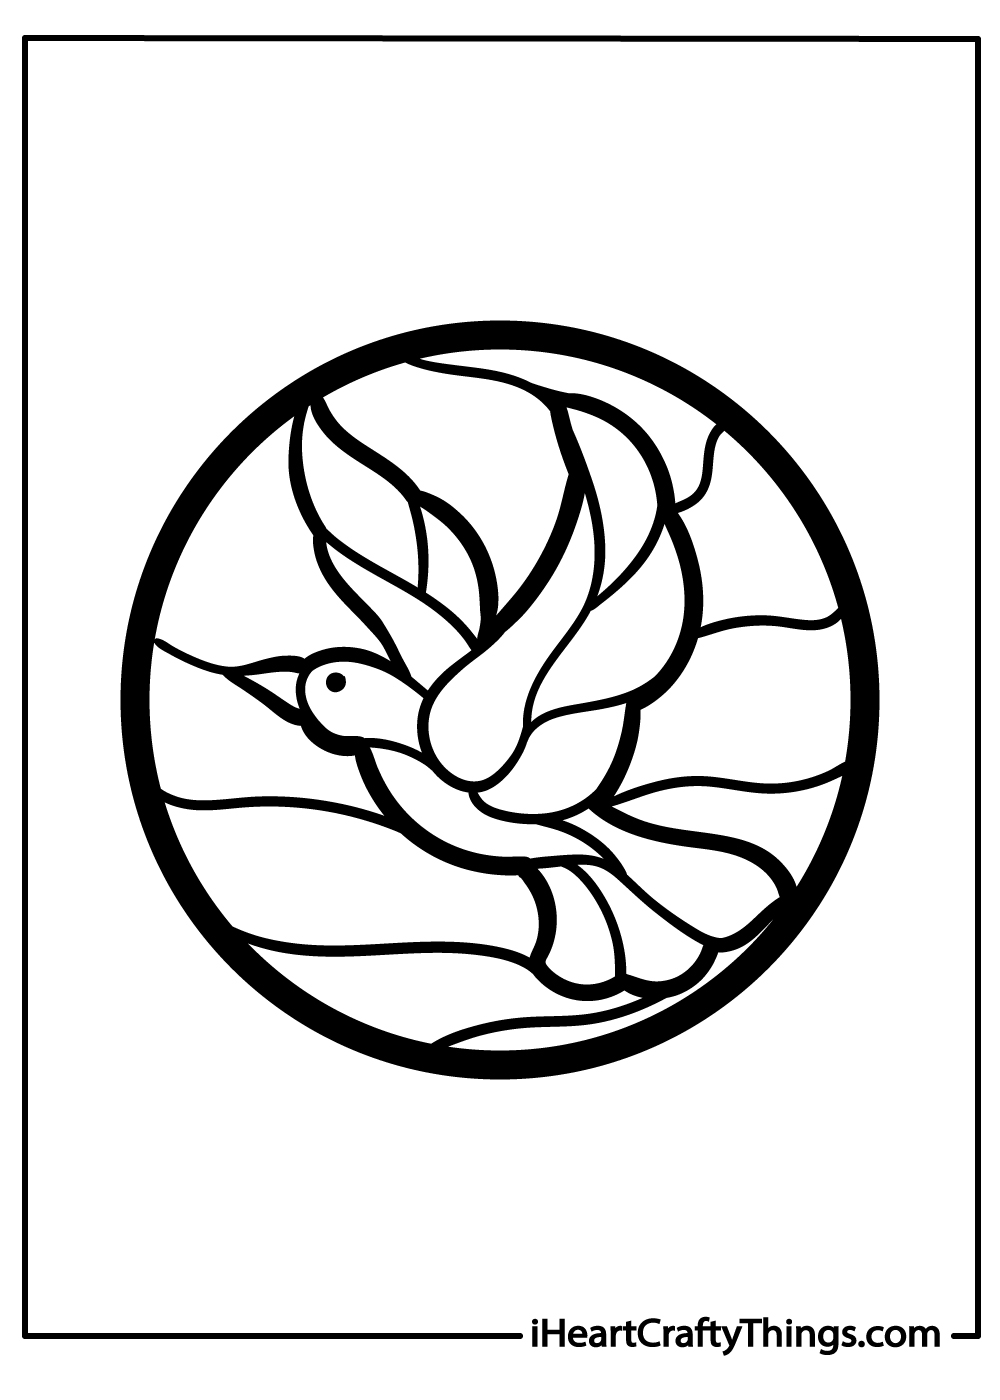 stained glass coloring sheet free download